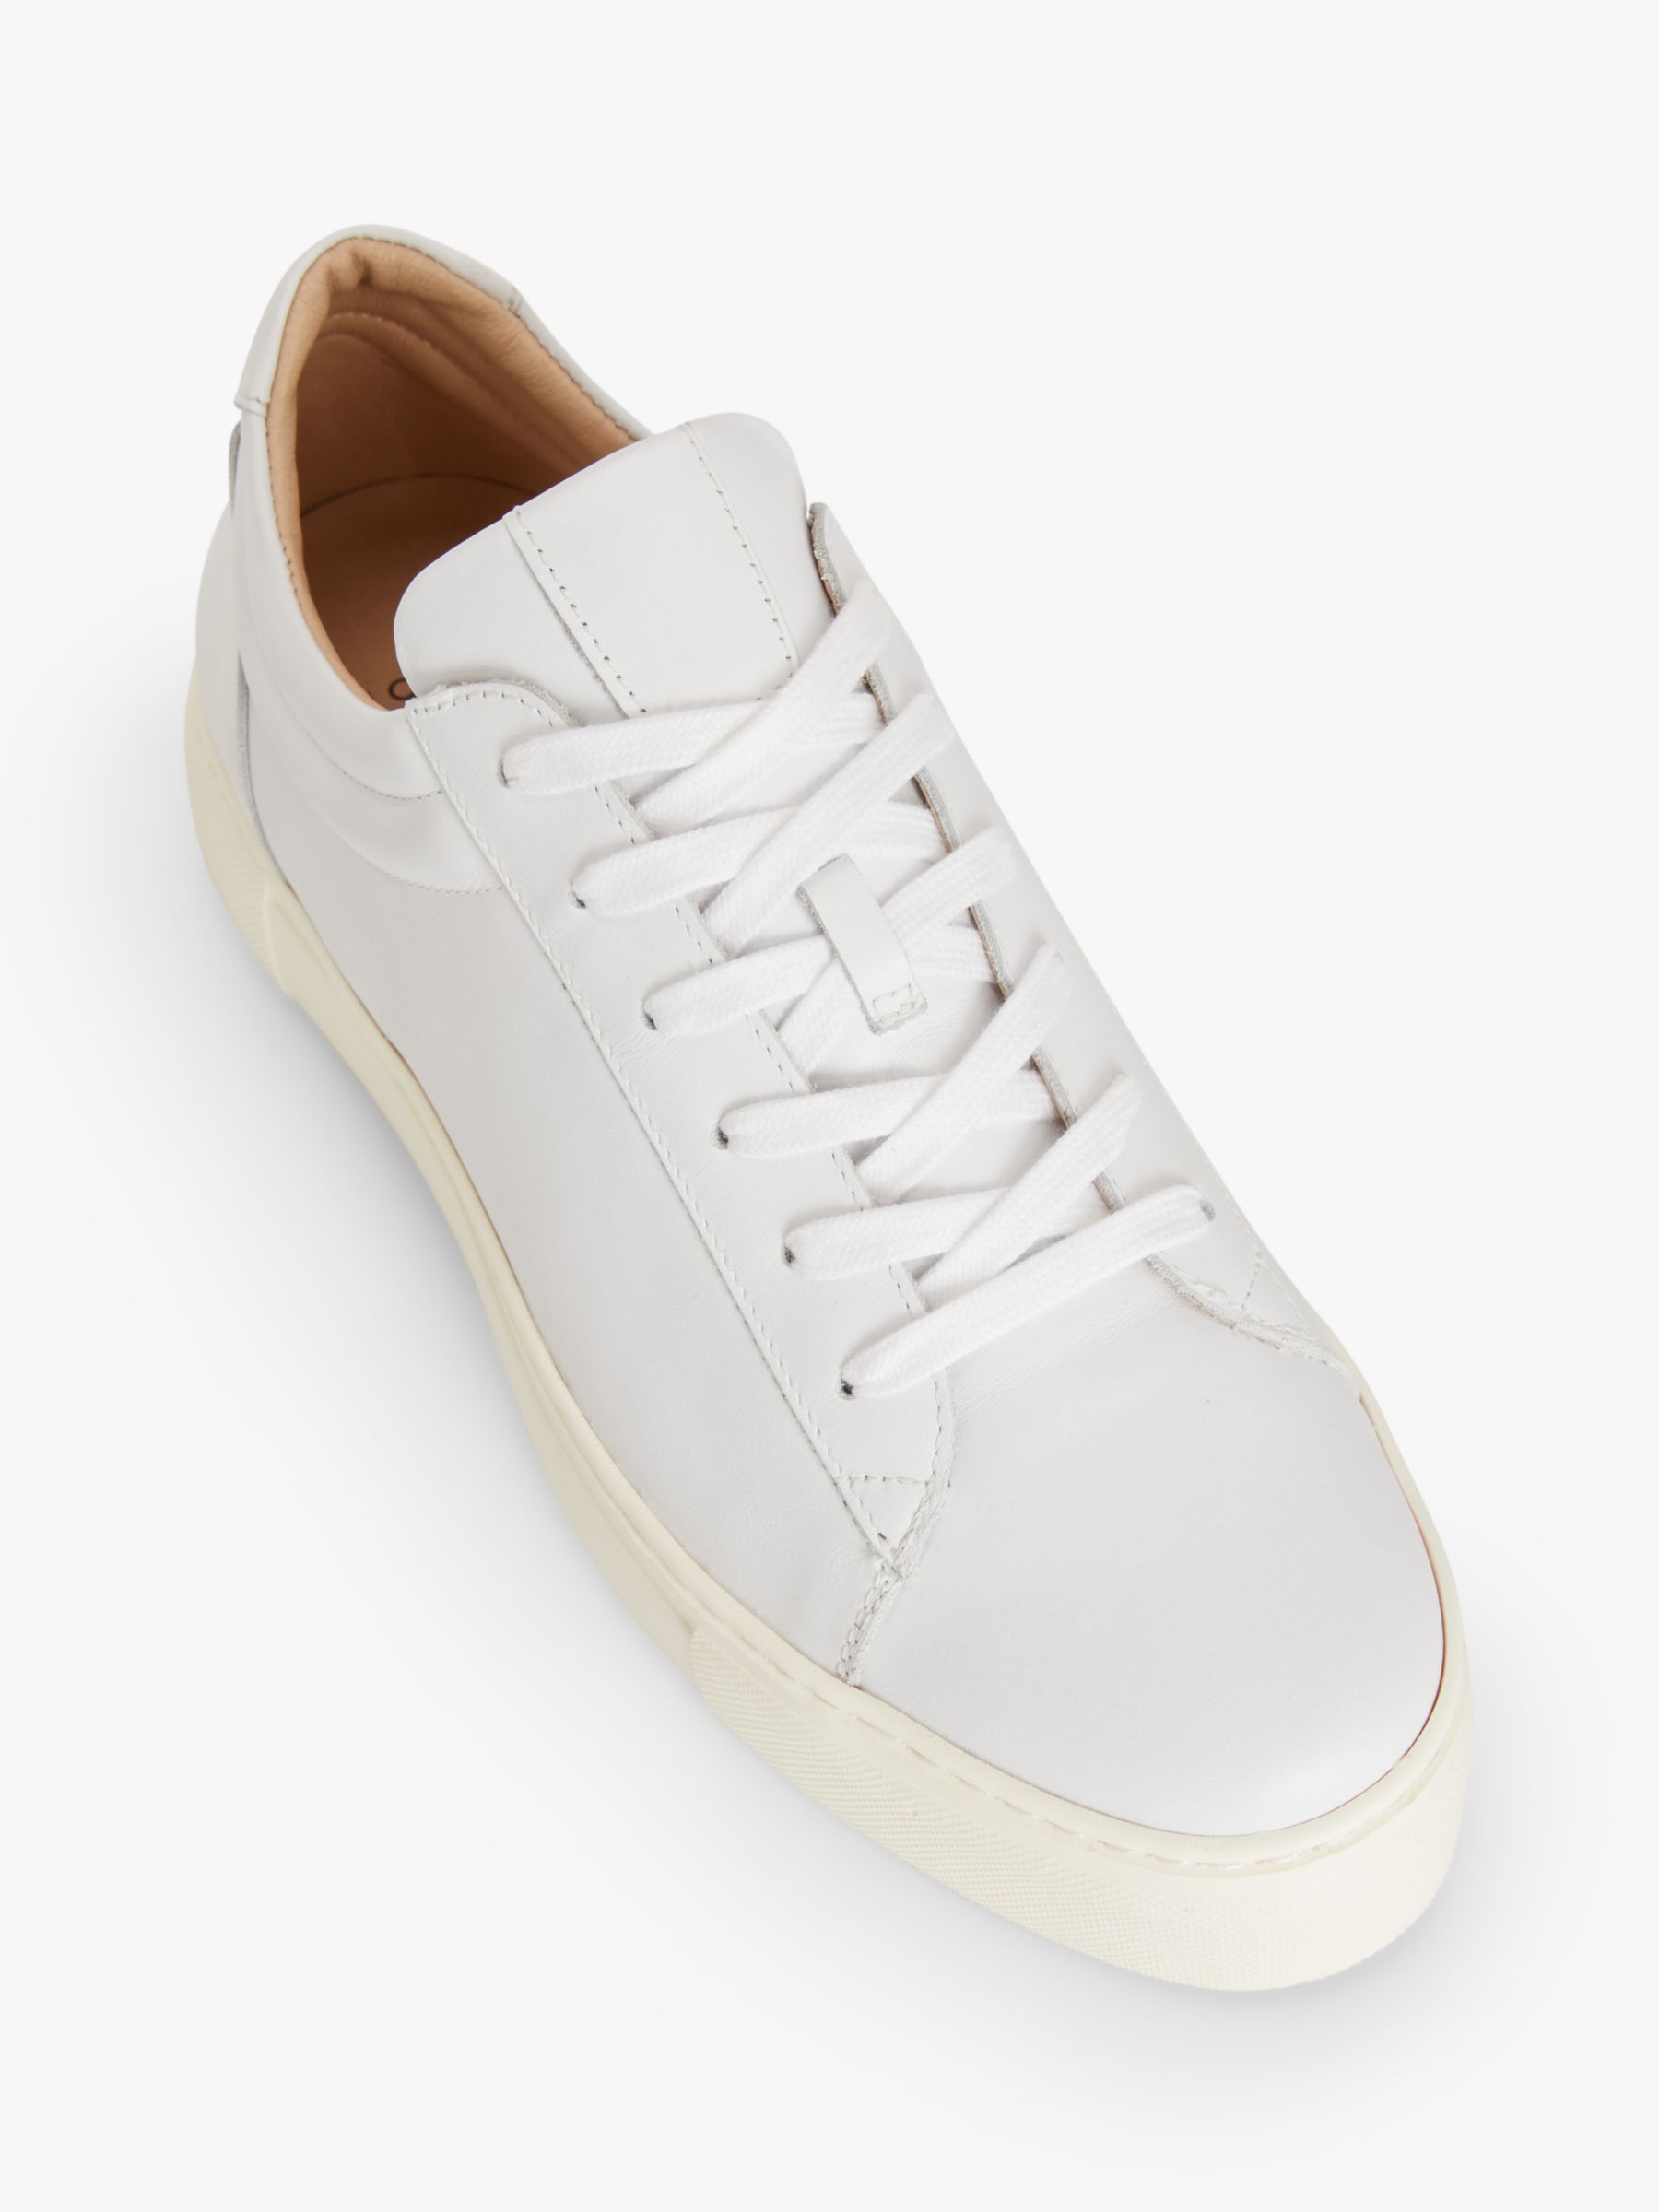 Buy John Lewis Fauna Leather Flatform Lace Up Trainers Online at johnlewis.com